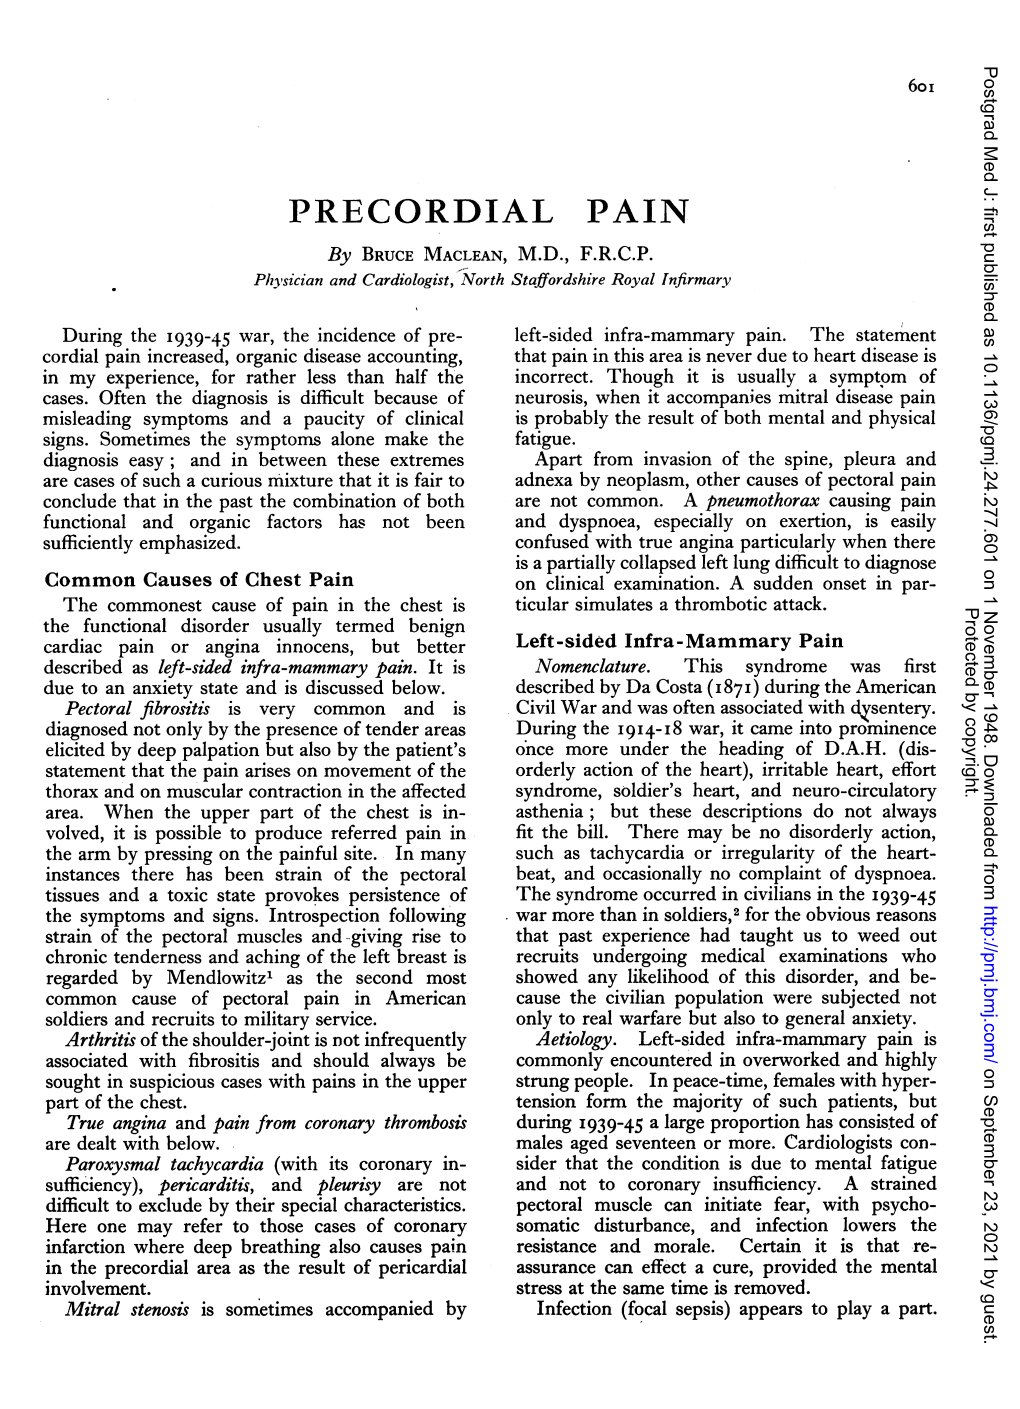 PRECORDIAL PAIN by BRUCE MACLEAN, M.D., F.R.C.P